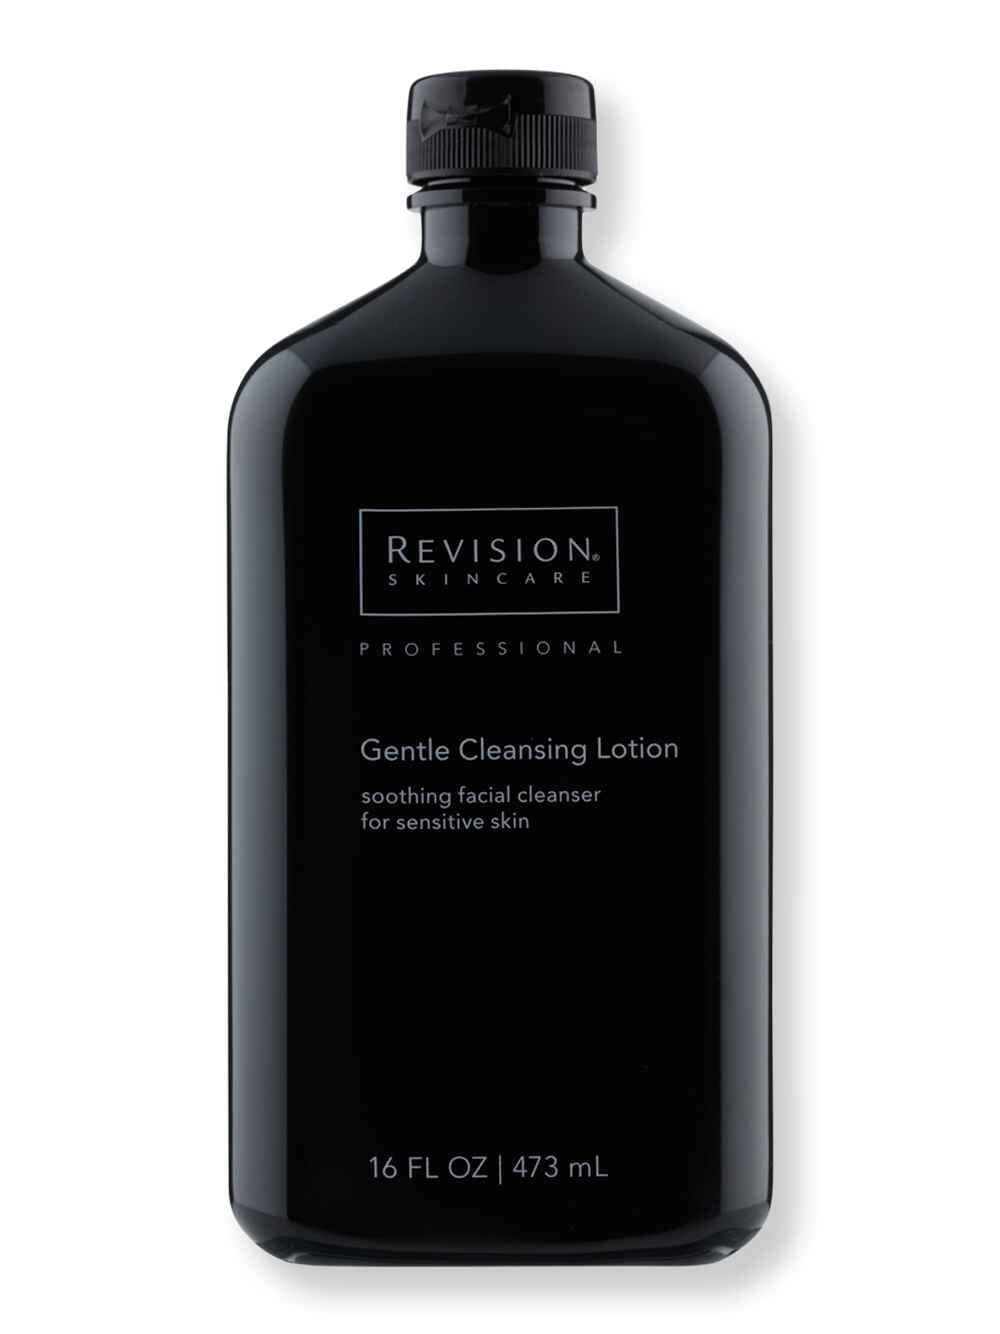 Revision Revision Gentle Cleansing Lotion 16 fl oz473 ml Face Cleansers 